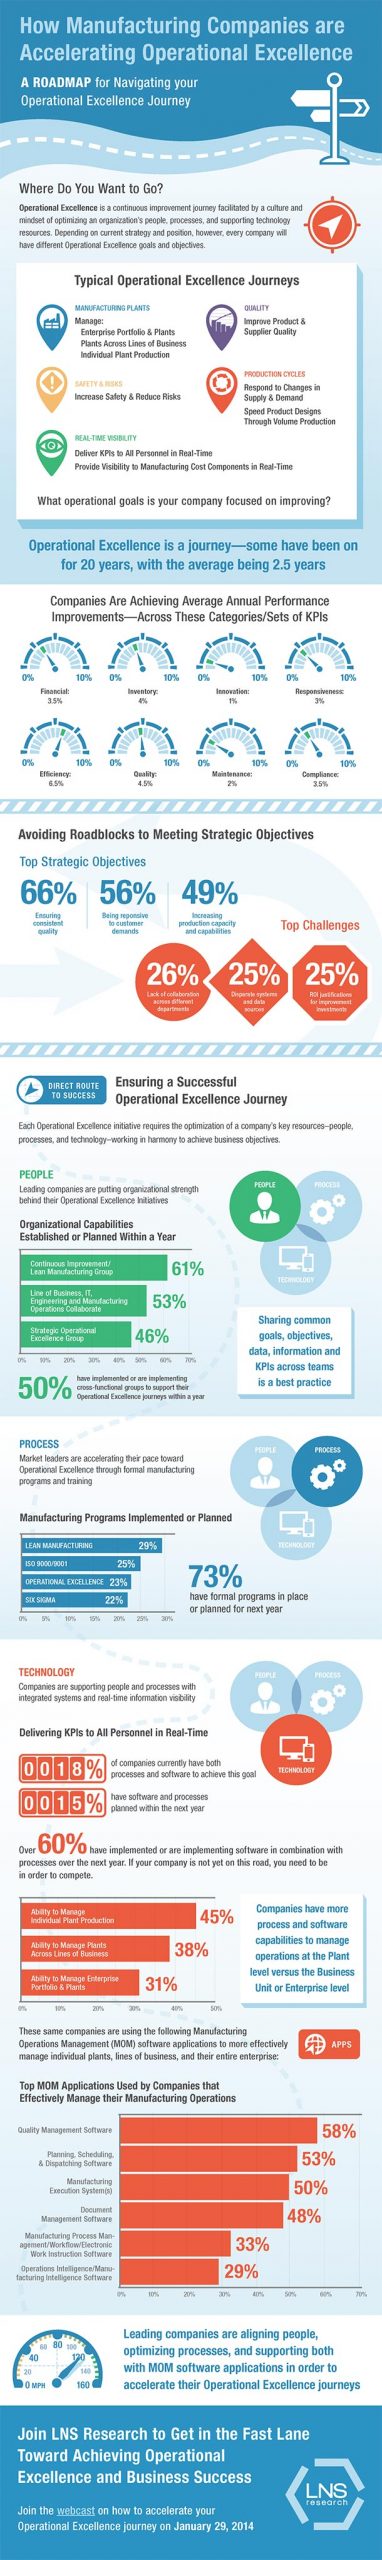 How manufacturing companies are accelerating operational excellence.